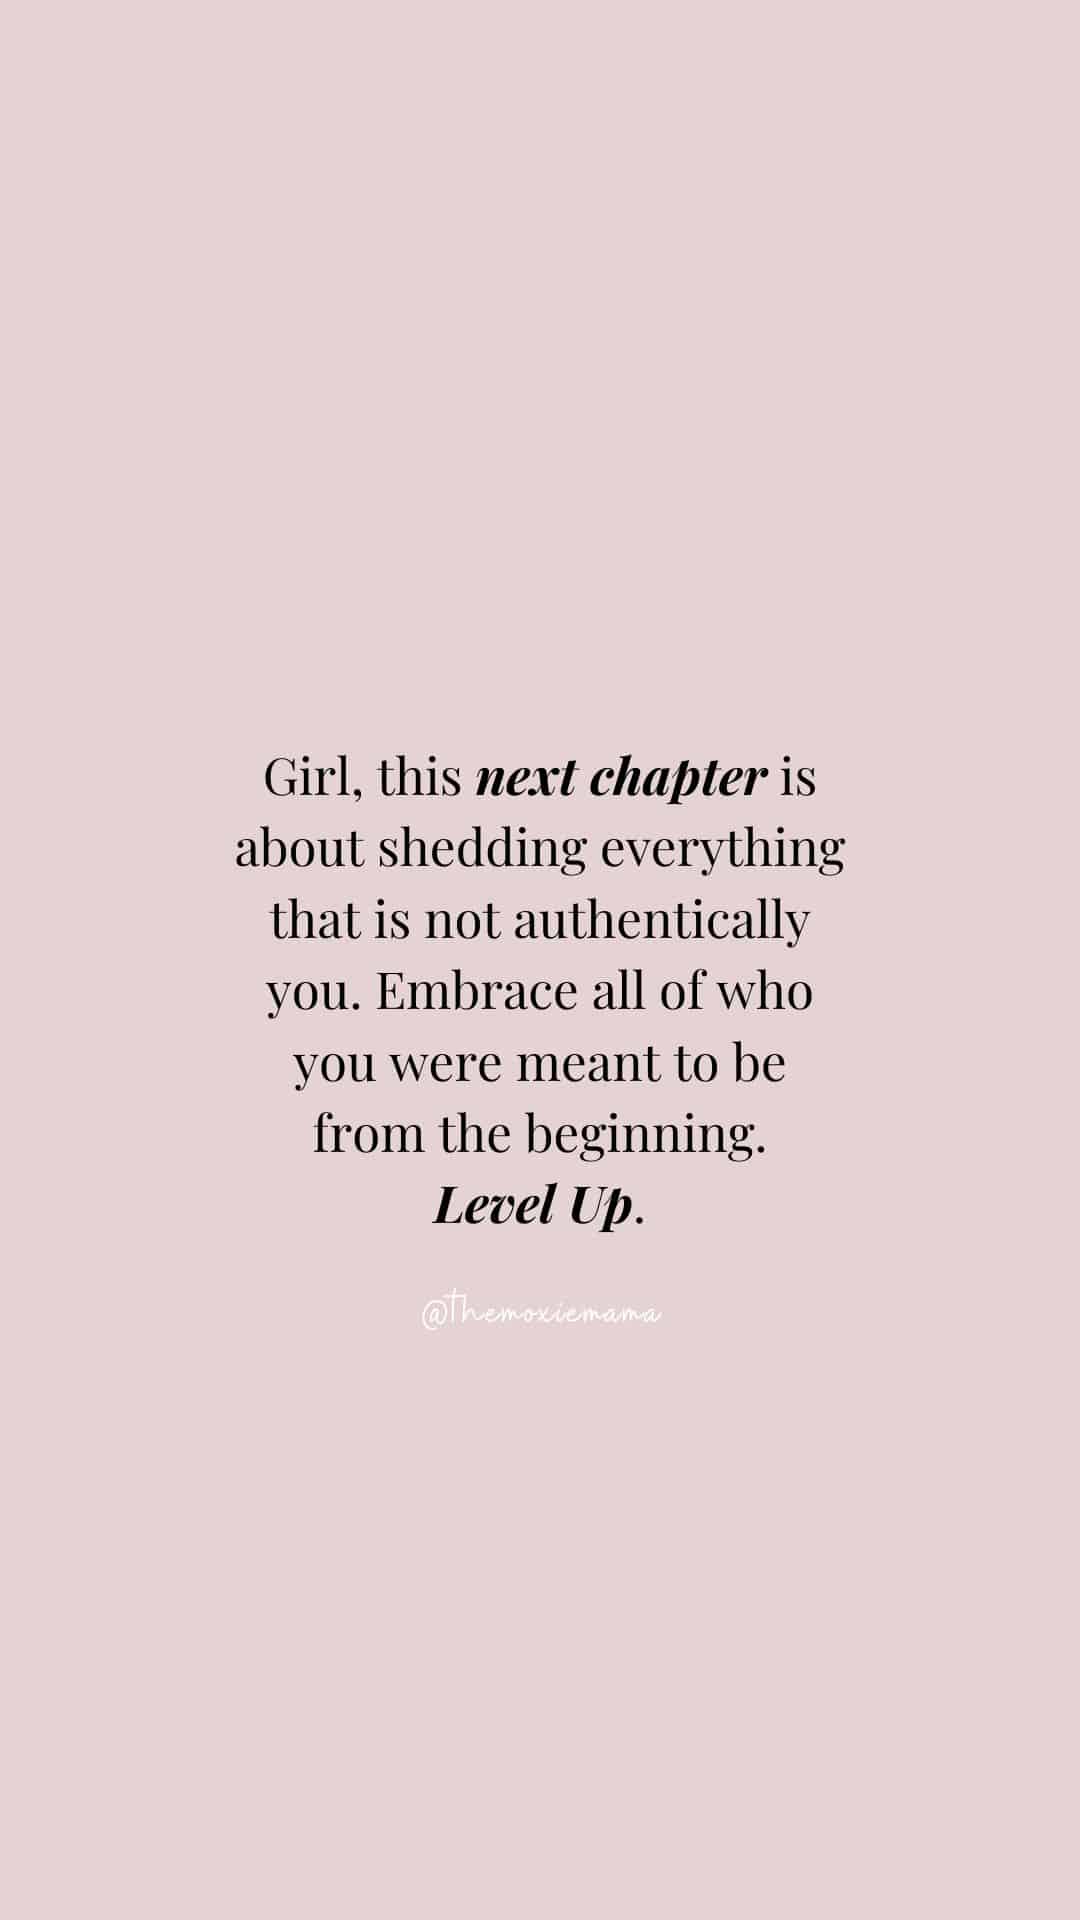 With each step into this next chapter, carry the unyielding confidence of shedding, the graceful embrace of authenticity, and the empowering energy of leveling up.